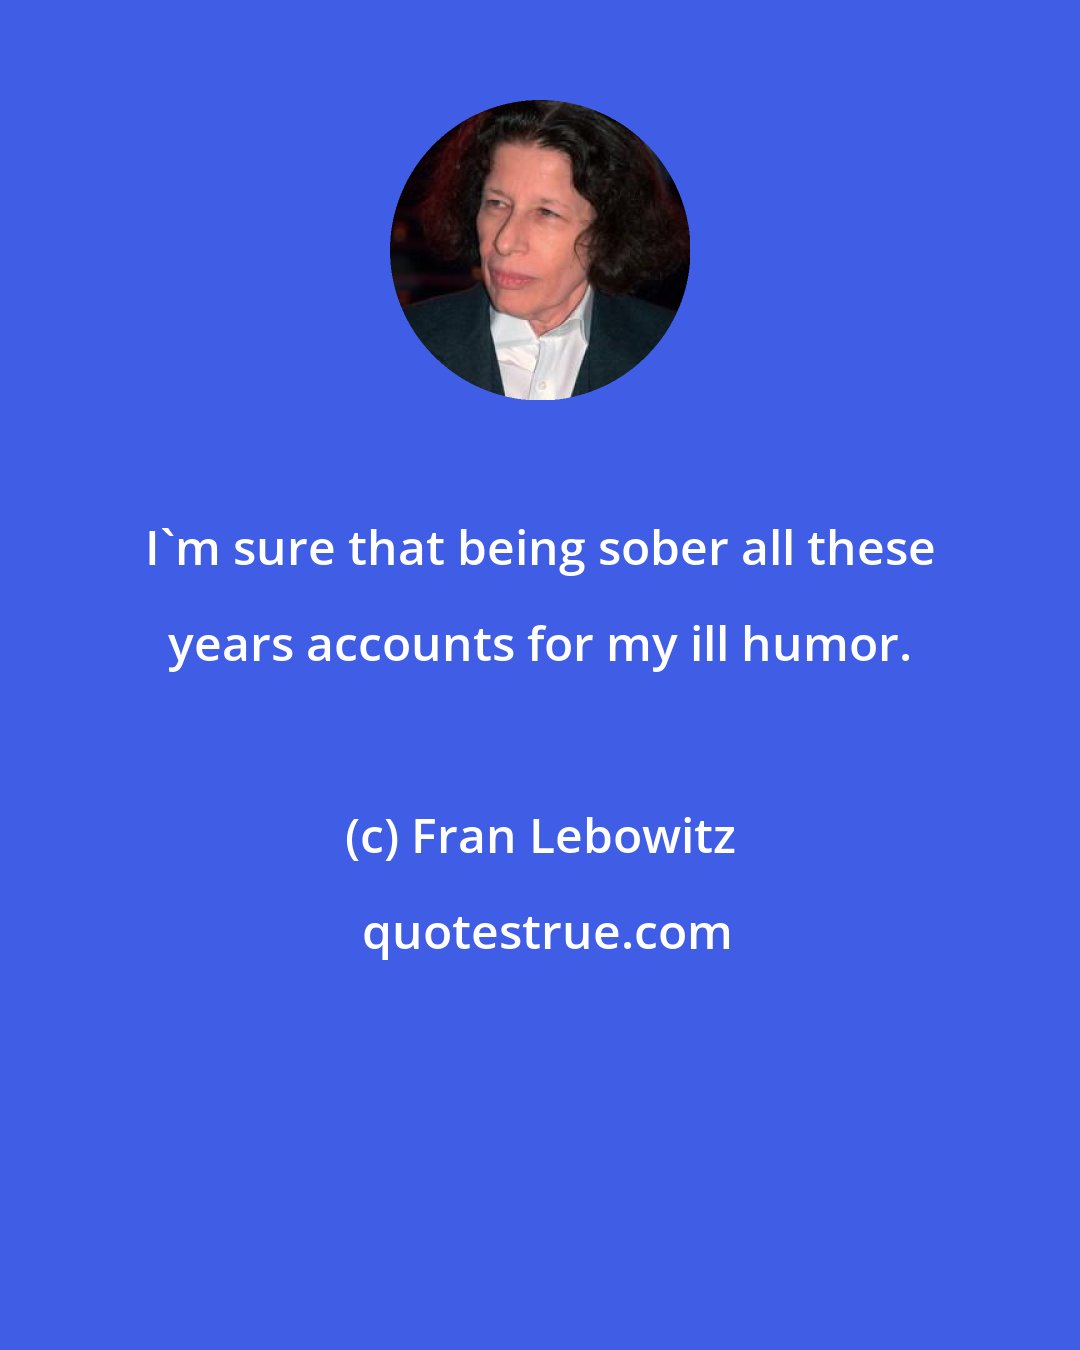 Fran Lebowitz: I'm sure that being sober all these years accounts for my ill humor.